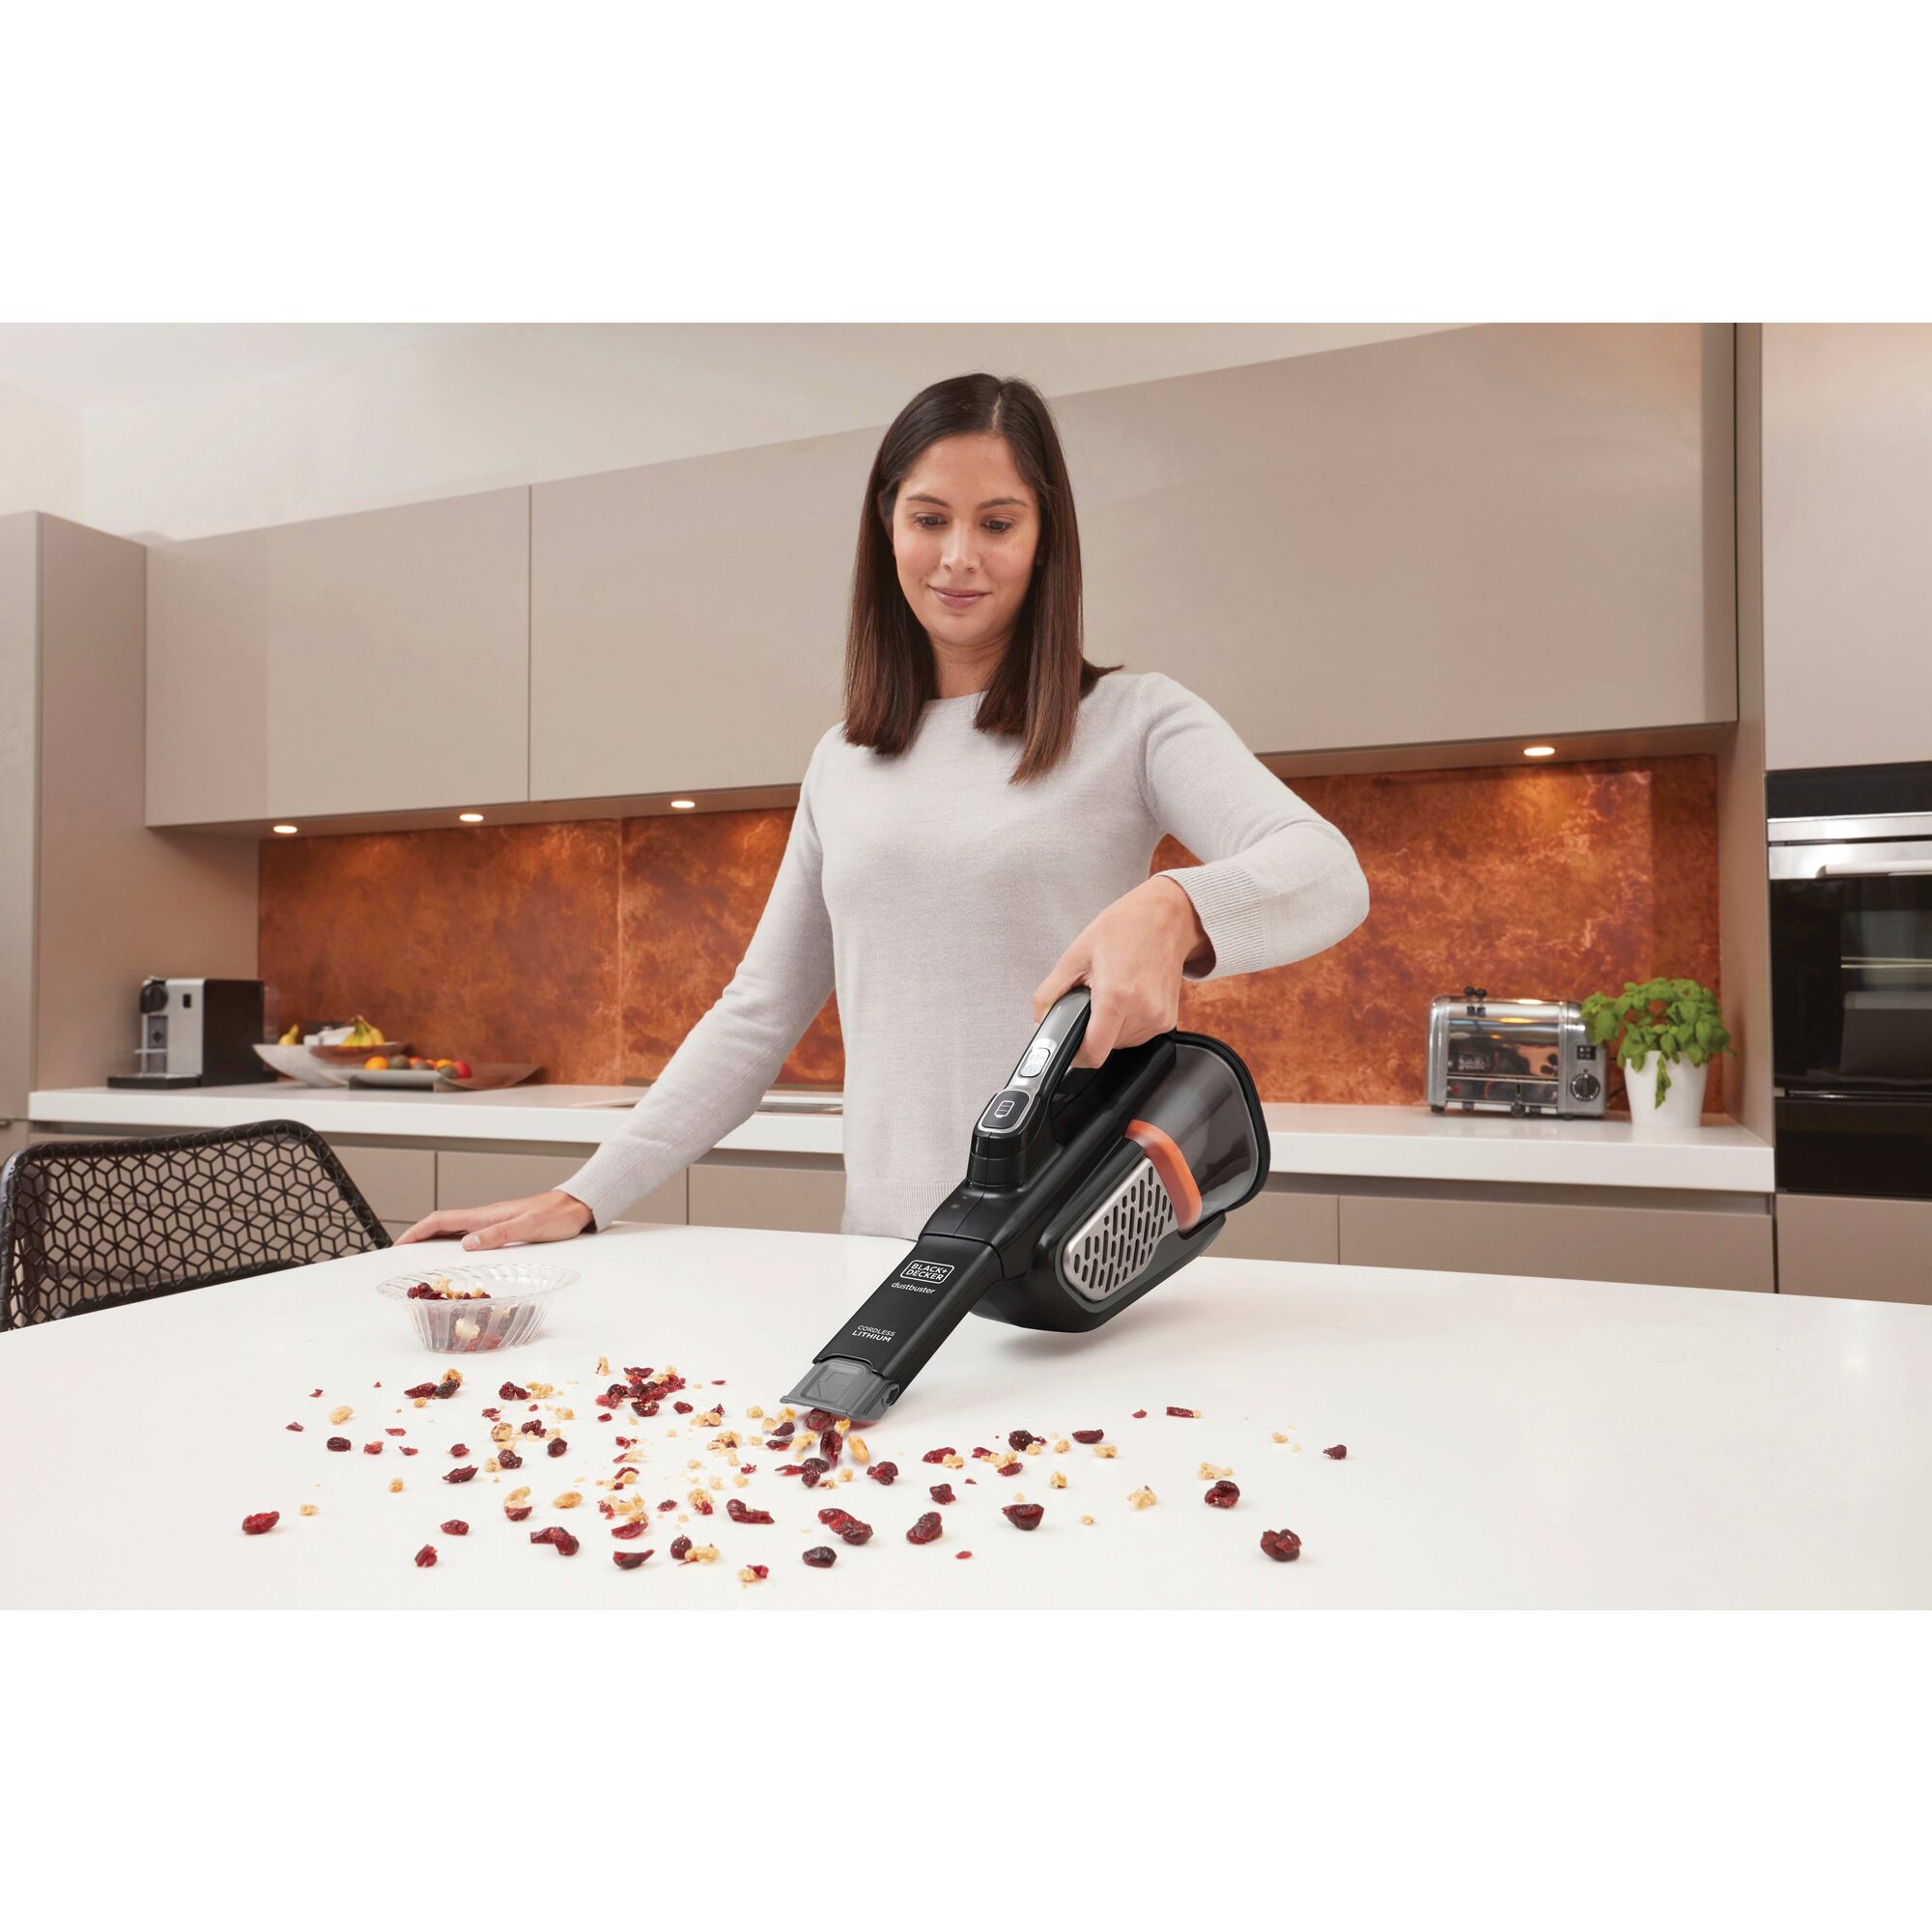 12 volt MAX dustbuster AdvancedClean cordless hand vacuum being used by a person to clean food spillage on kitchen counter.